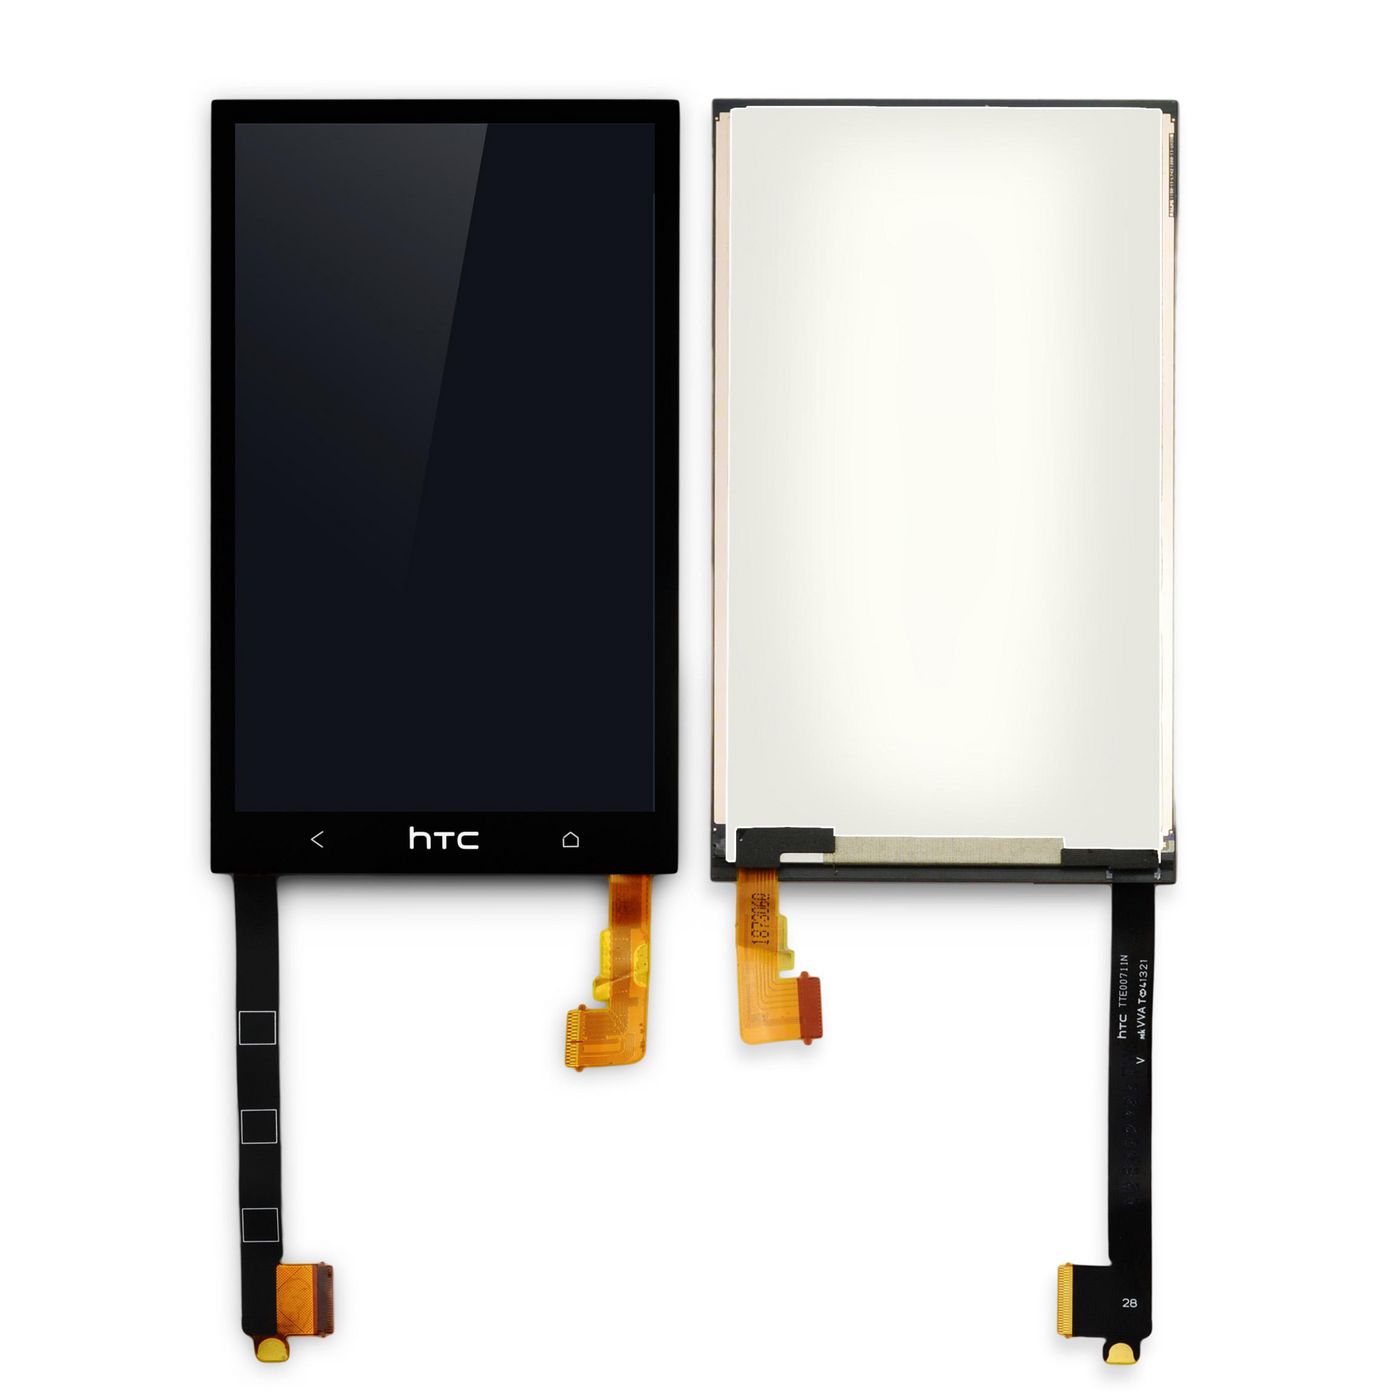 CoreParts MSPP71670 HTC One LCD Screen with 